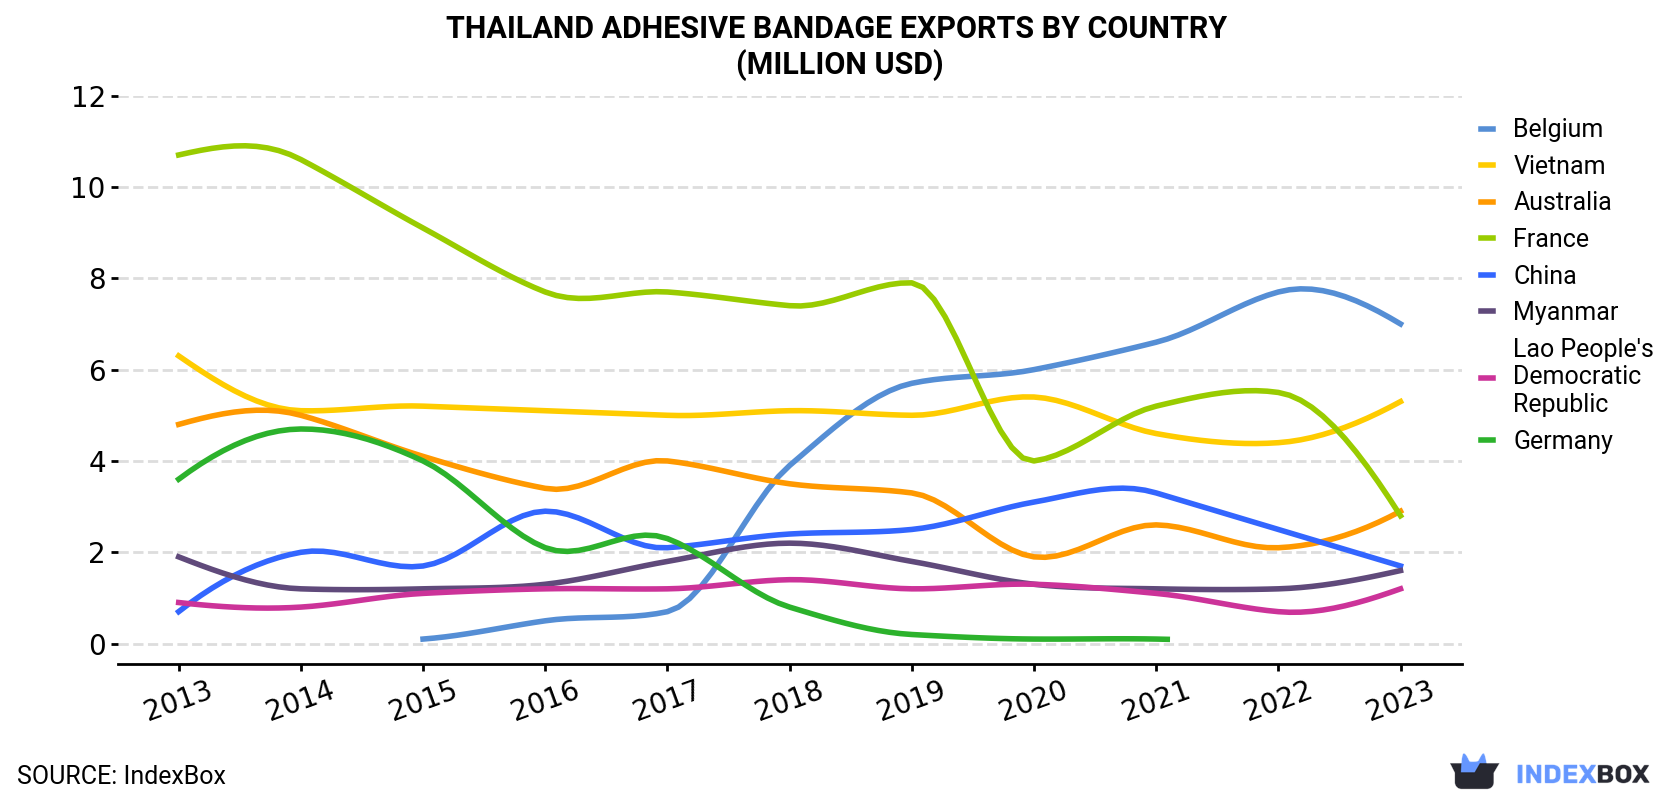 Thailand Adhesive Bandage Exports By Country (Million USD)